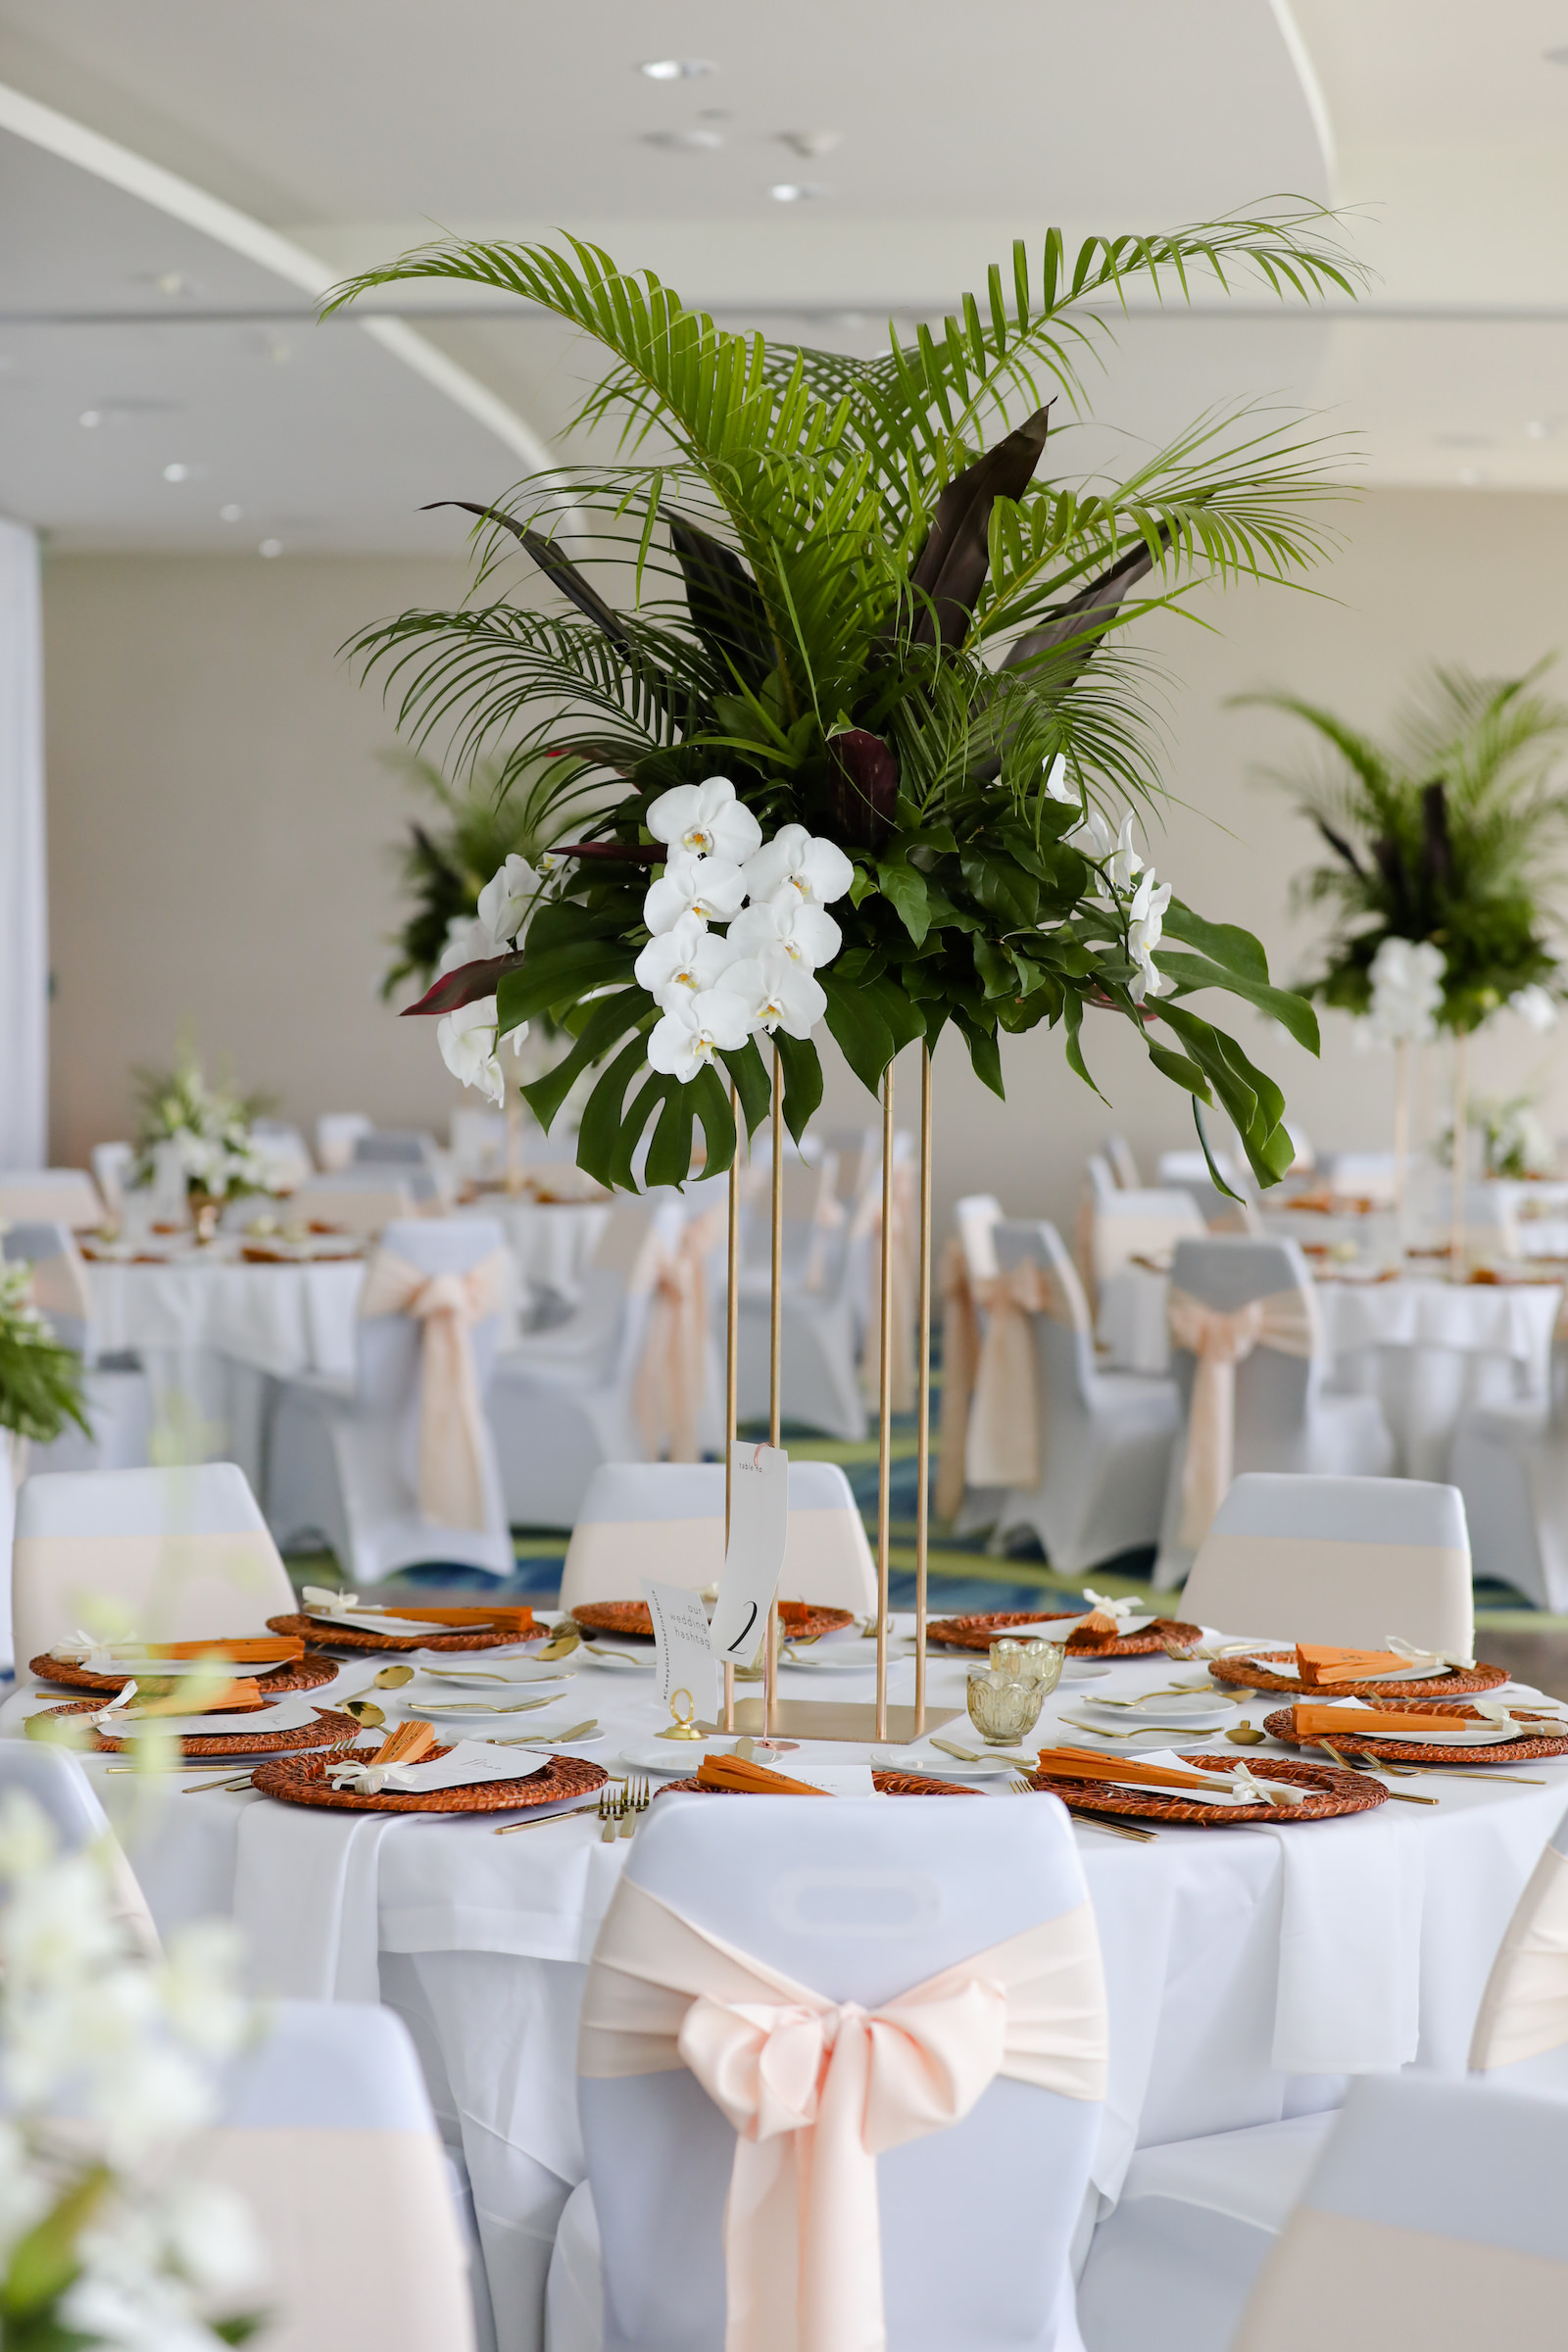 Modern Tablescape with Tall Gold Centerpieces with Greenery and White Flowers and Woven Chargers